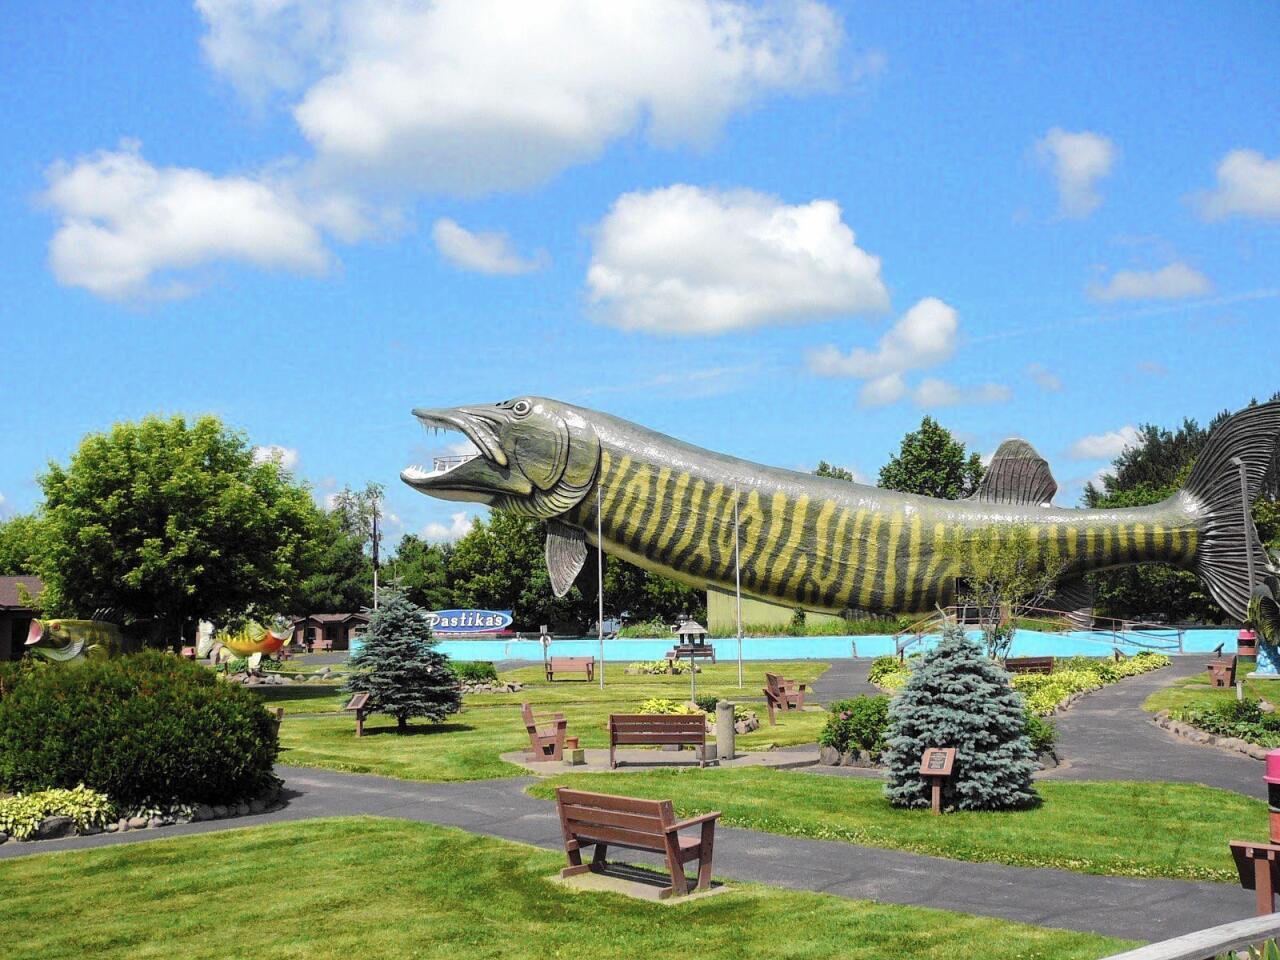 A 143-foot-long replica of the muskellunge is the most iconic structure in Hayward, Wis.